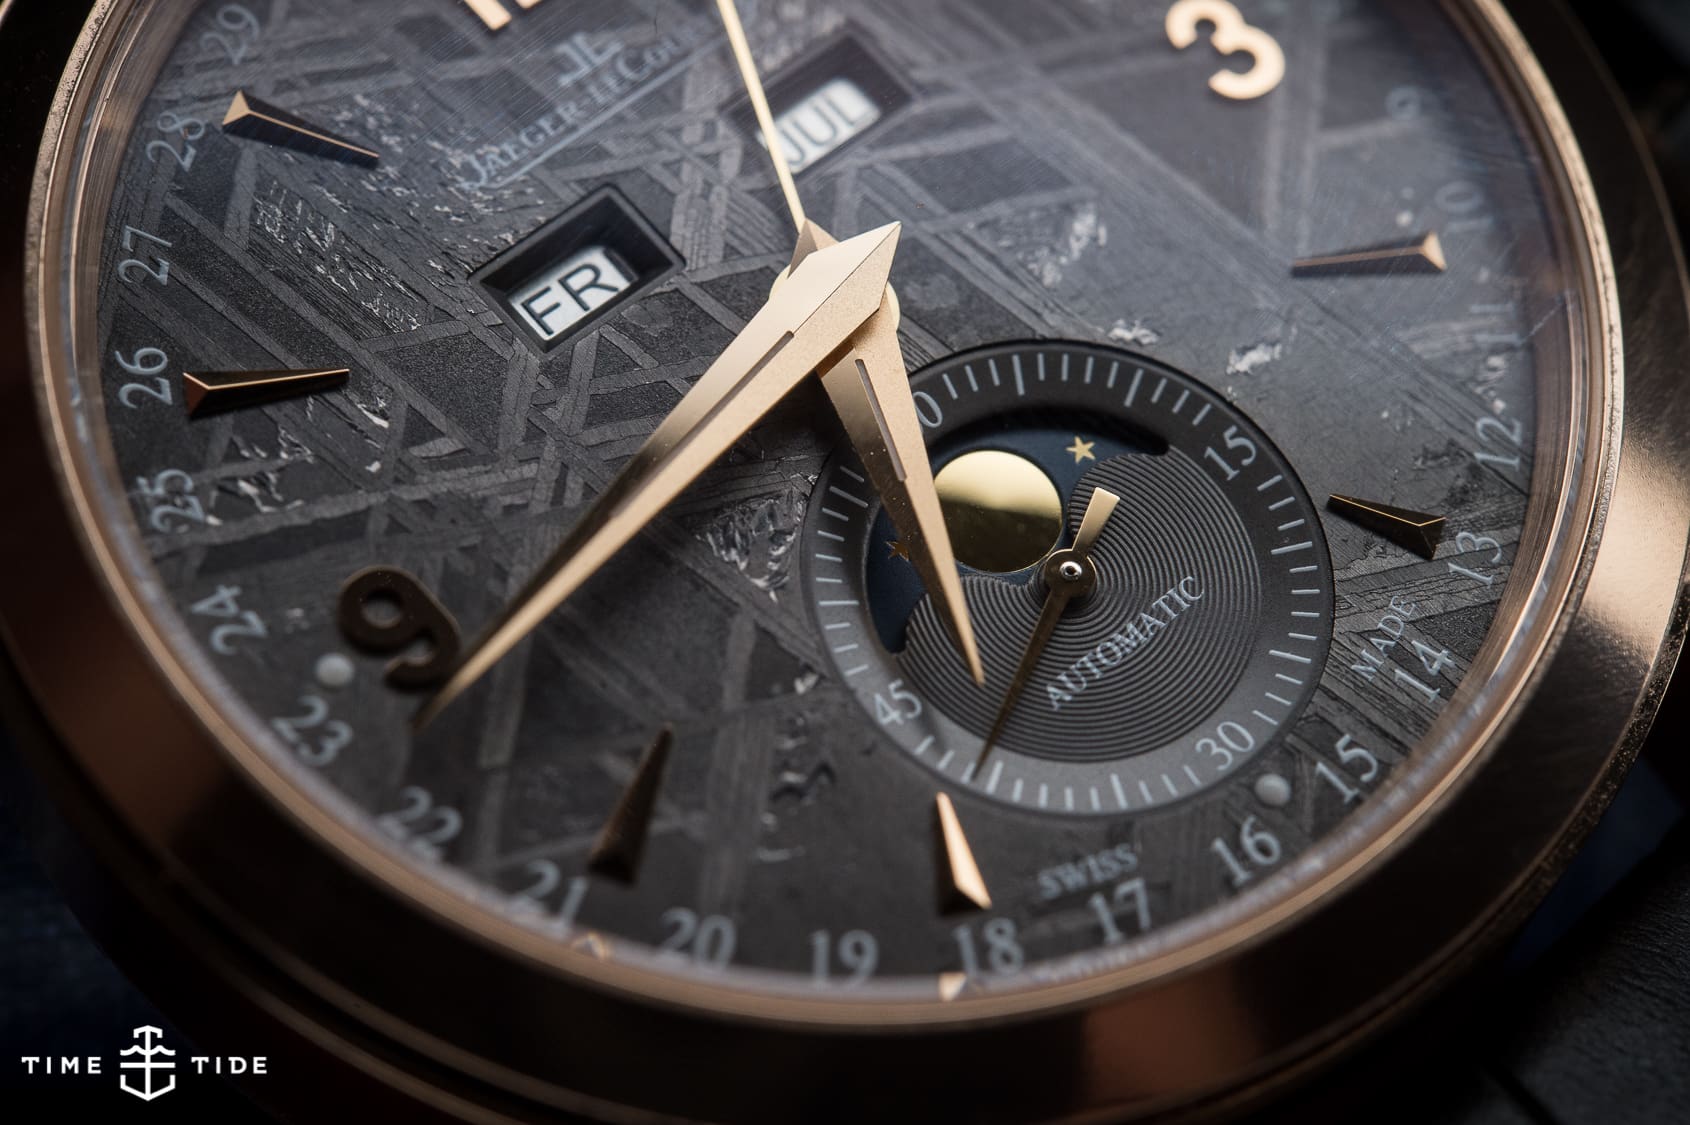 EDITOR’S PICK: JLC’s Master Calendar Meteorite is out of this world